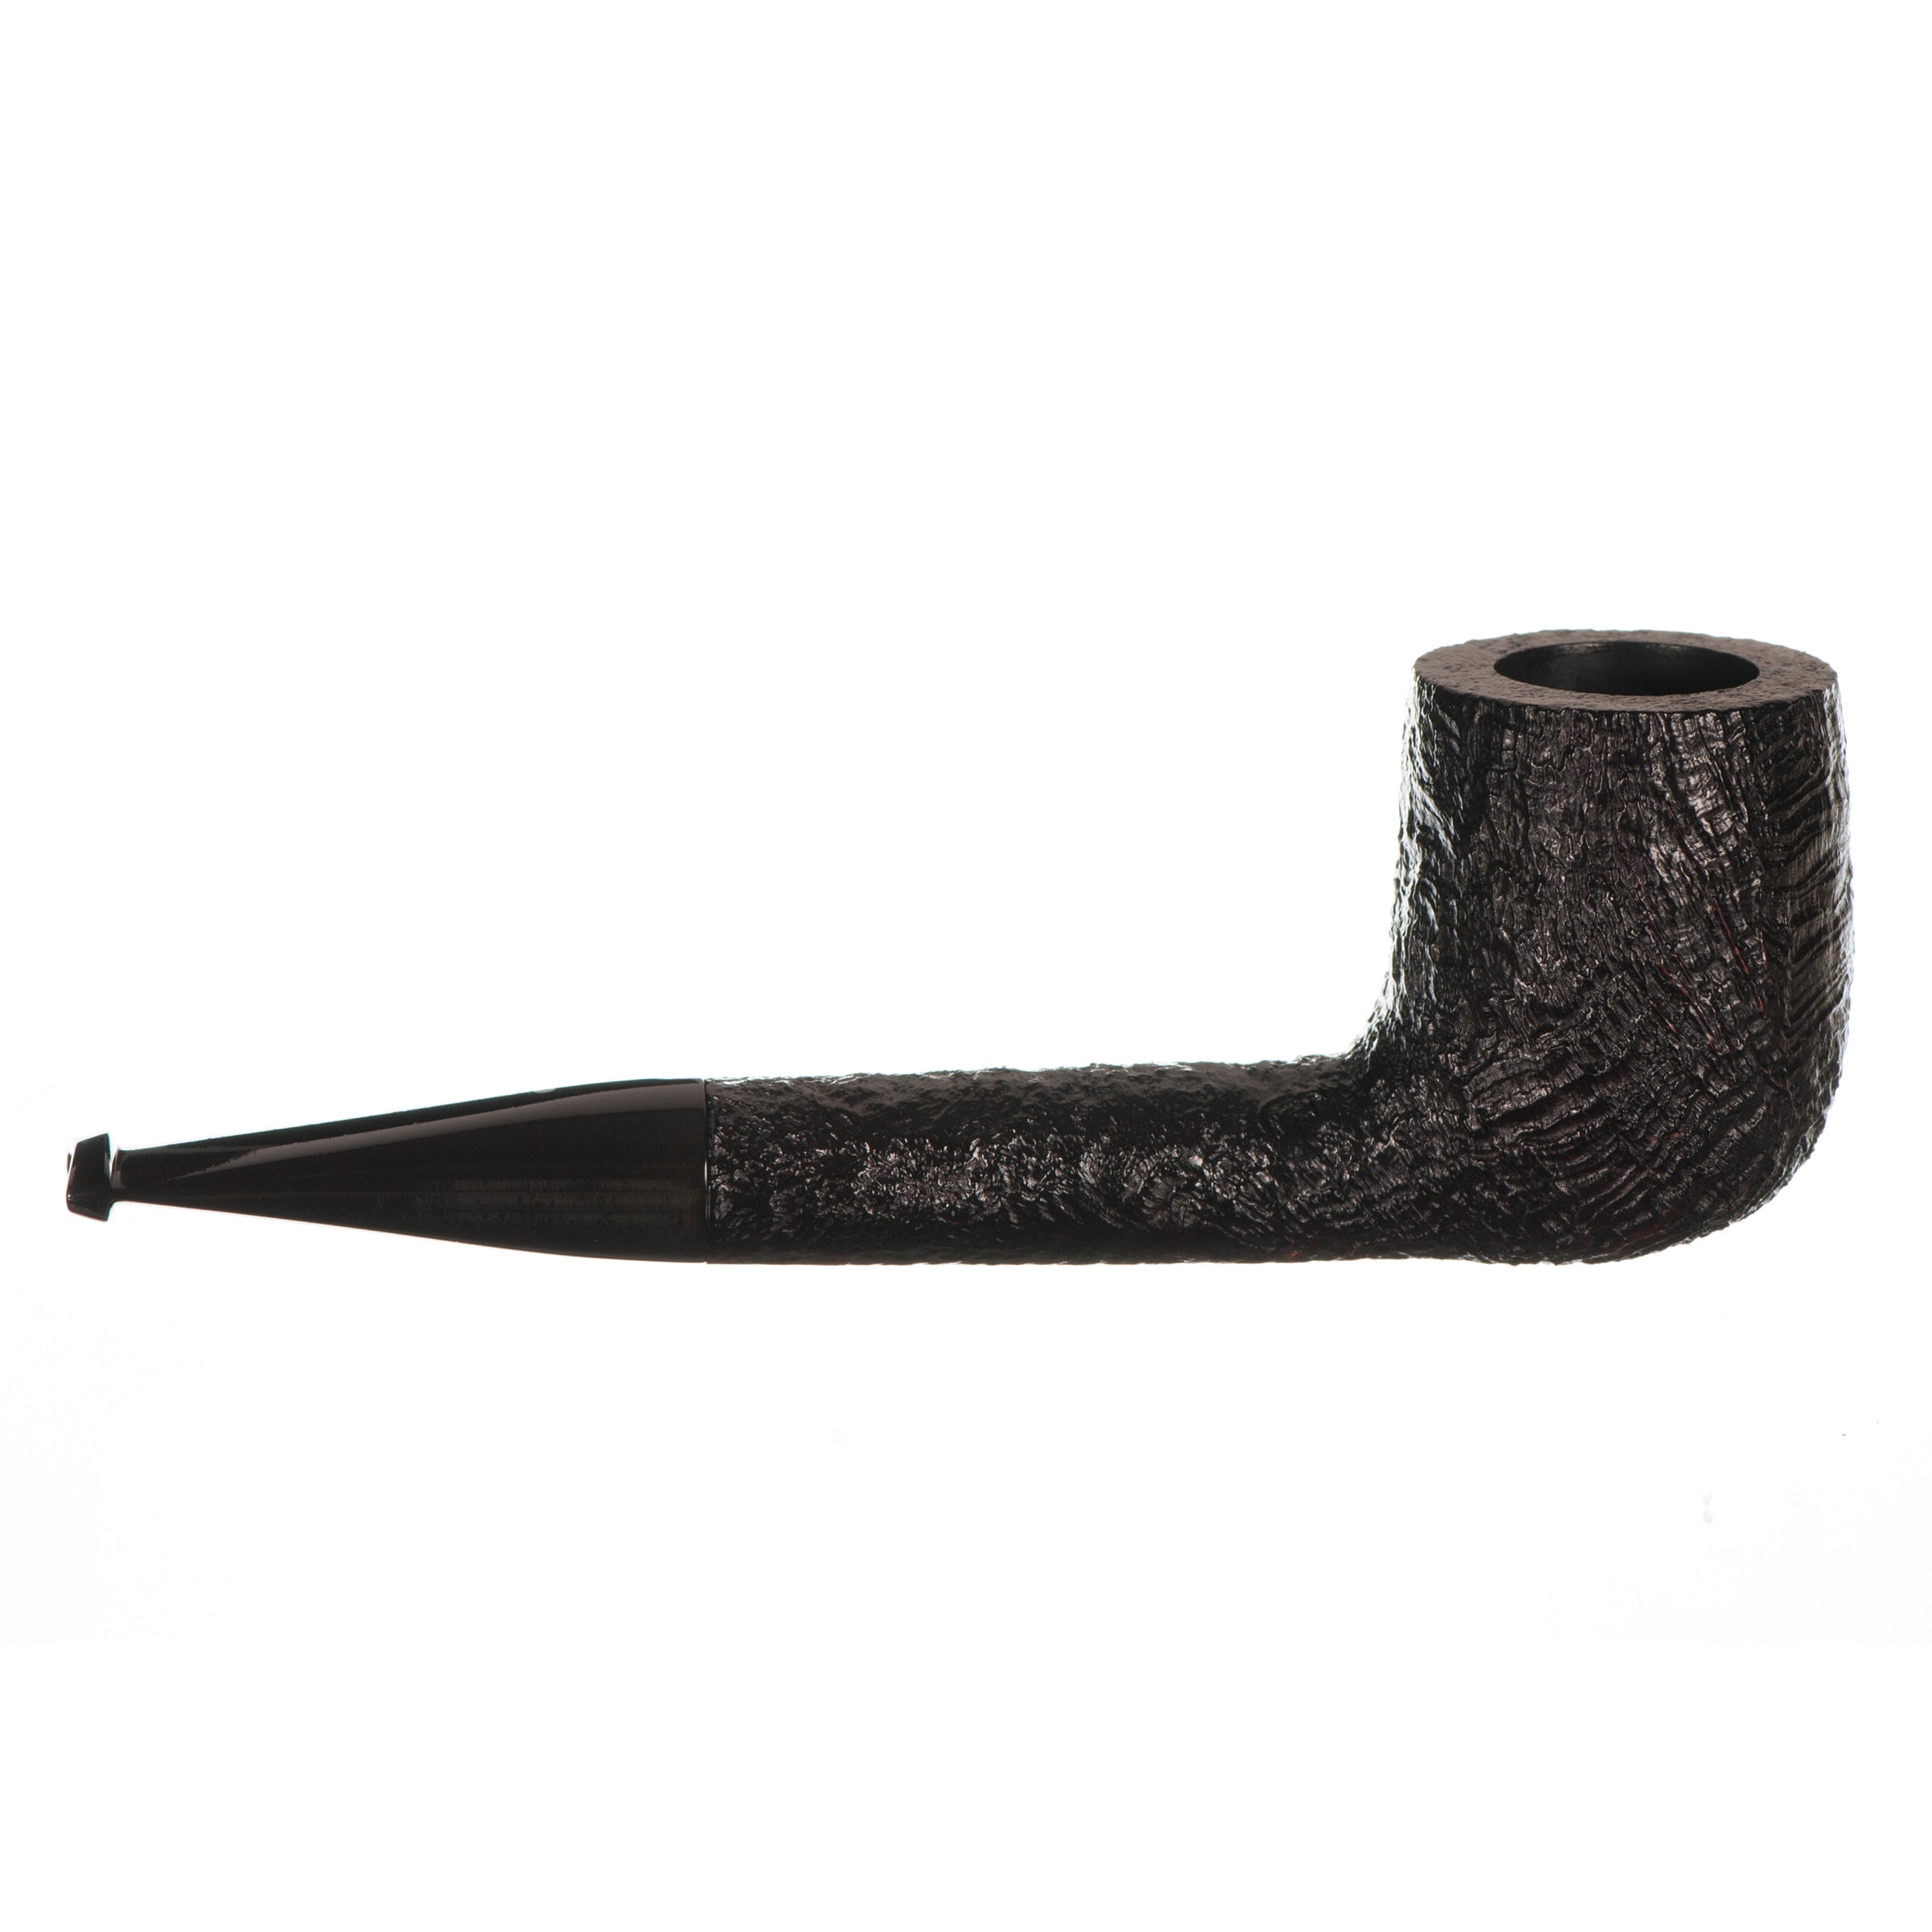 Dunhill Shell Briar 4110 Pipe